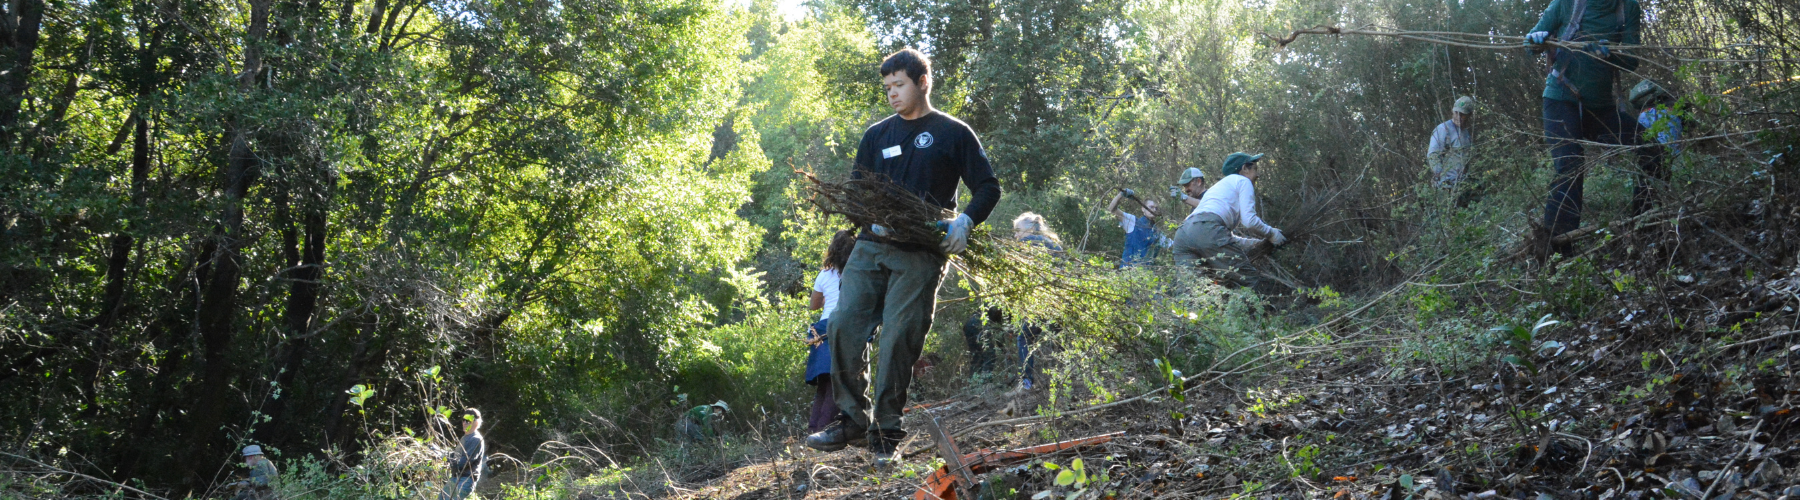 A person carries broom down a hill while other volunteers pull broom in the background